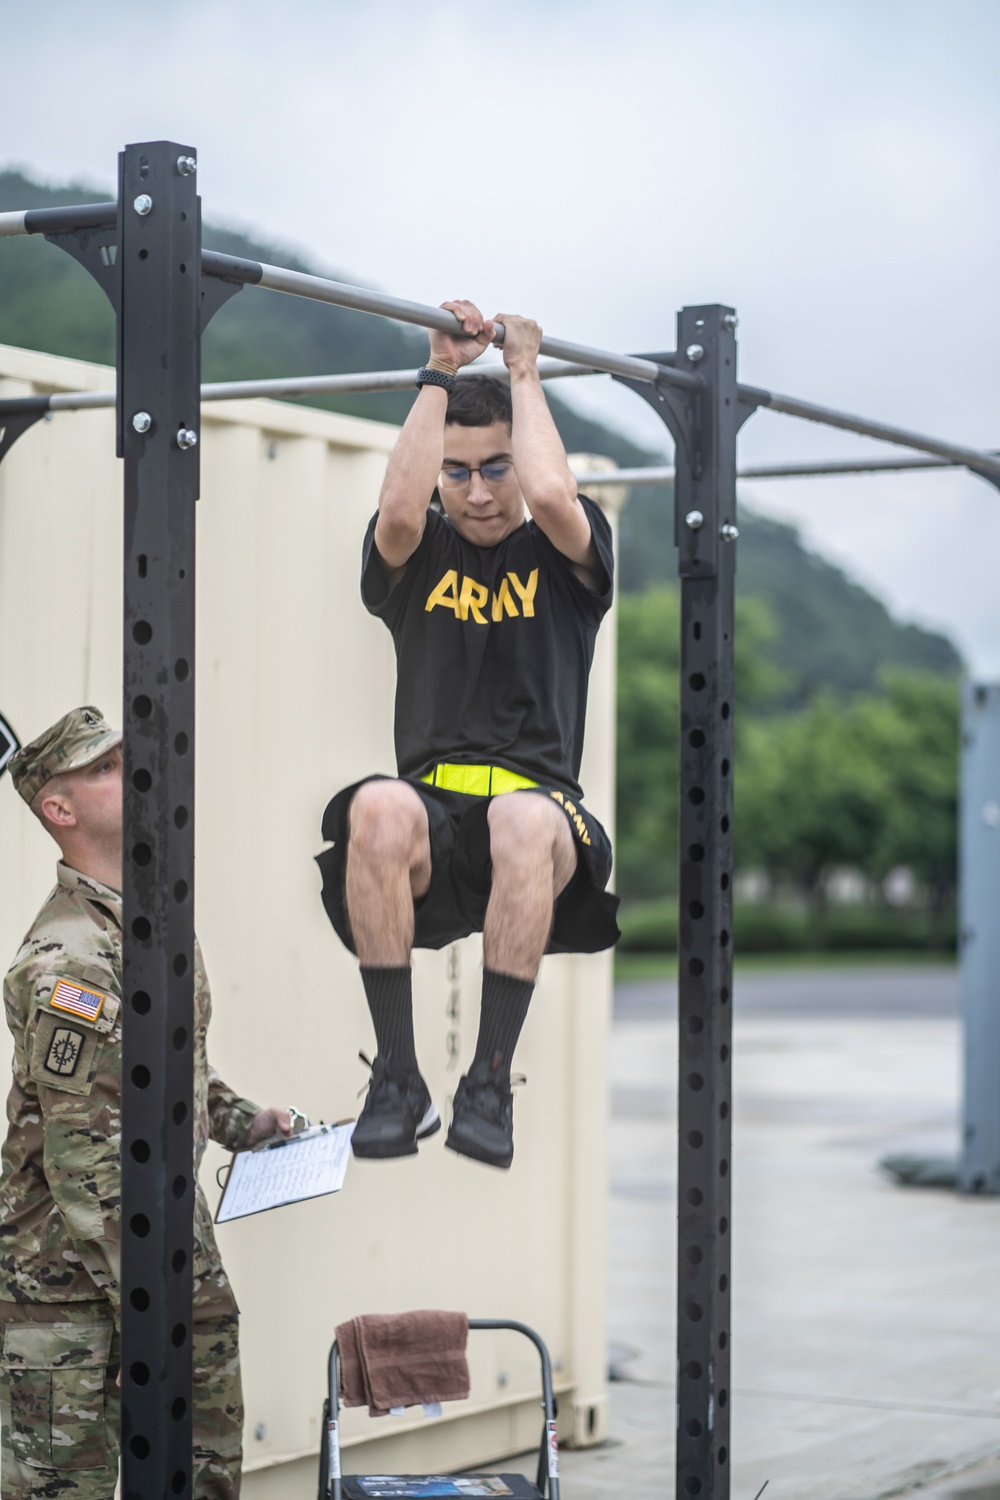 USARPAC BWC 2021: South Korea, 94th Army Air and Missile Defense Command, Spc. Uriel Trejo preforms the Leg Tuck exercise